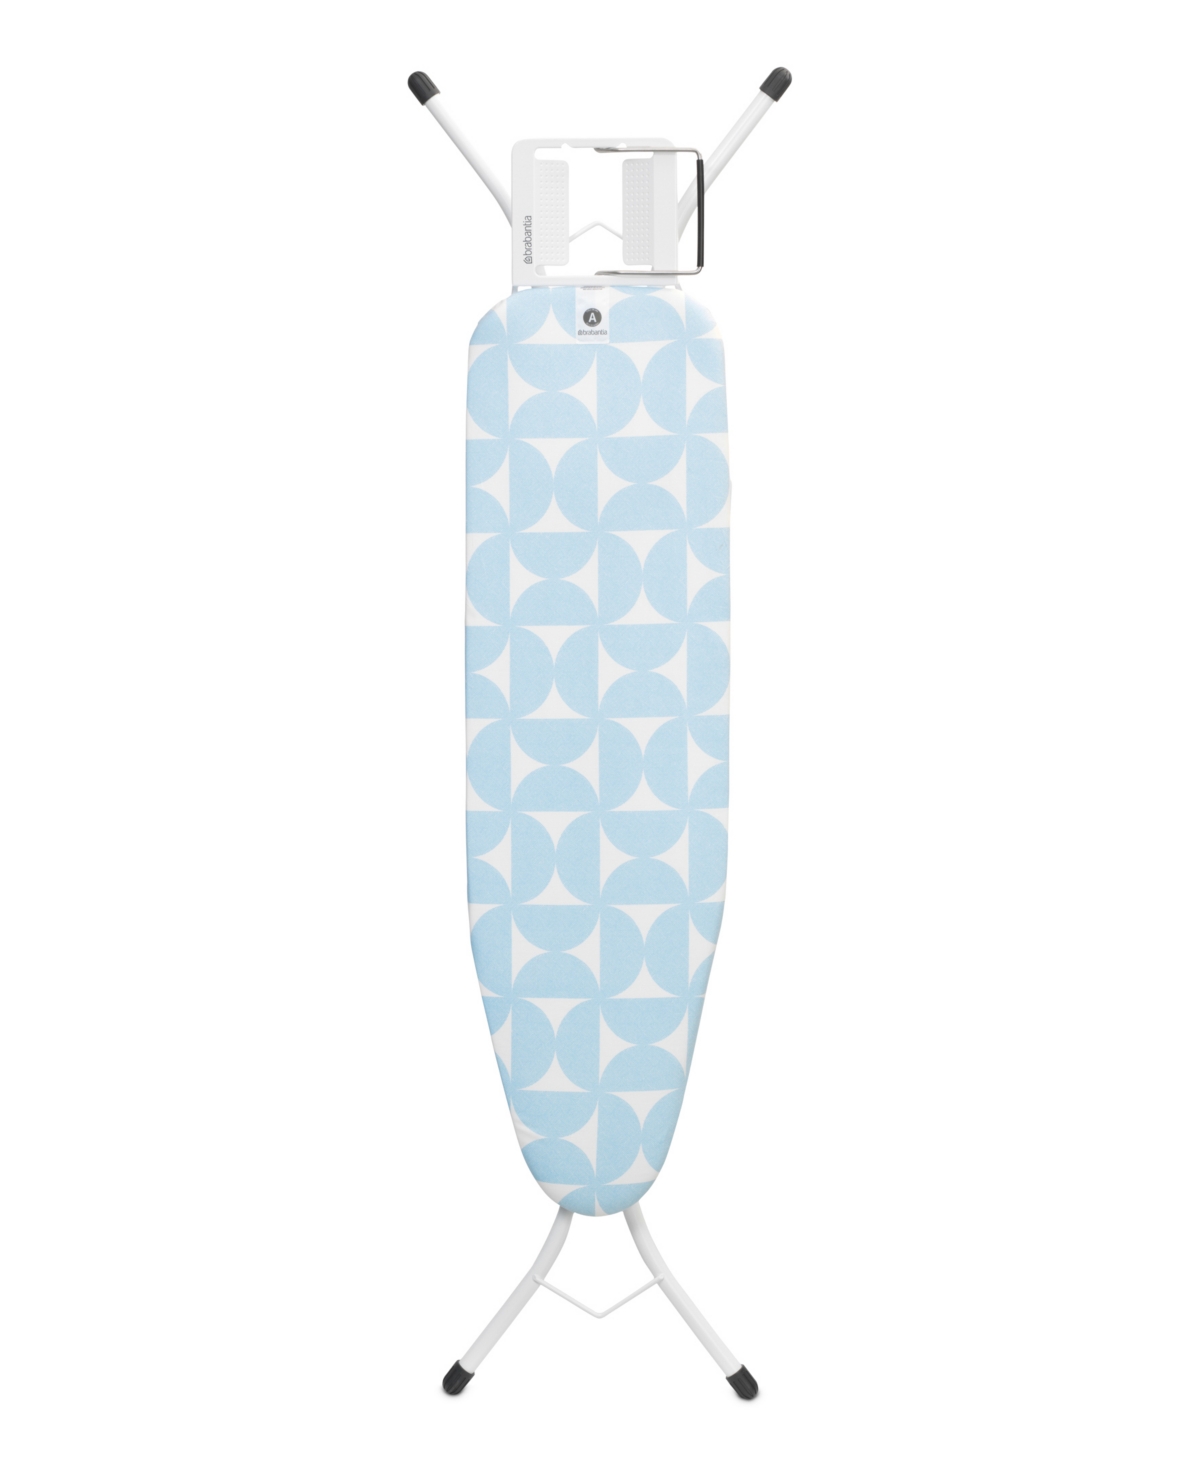 Brabantia Ironing Board A, 43 X 12" 110 X 30 Centimeter With Steam Iron Rest, 0.9" 22 Millimeter And Frame In Fresh Breeze